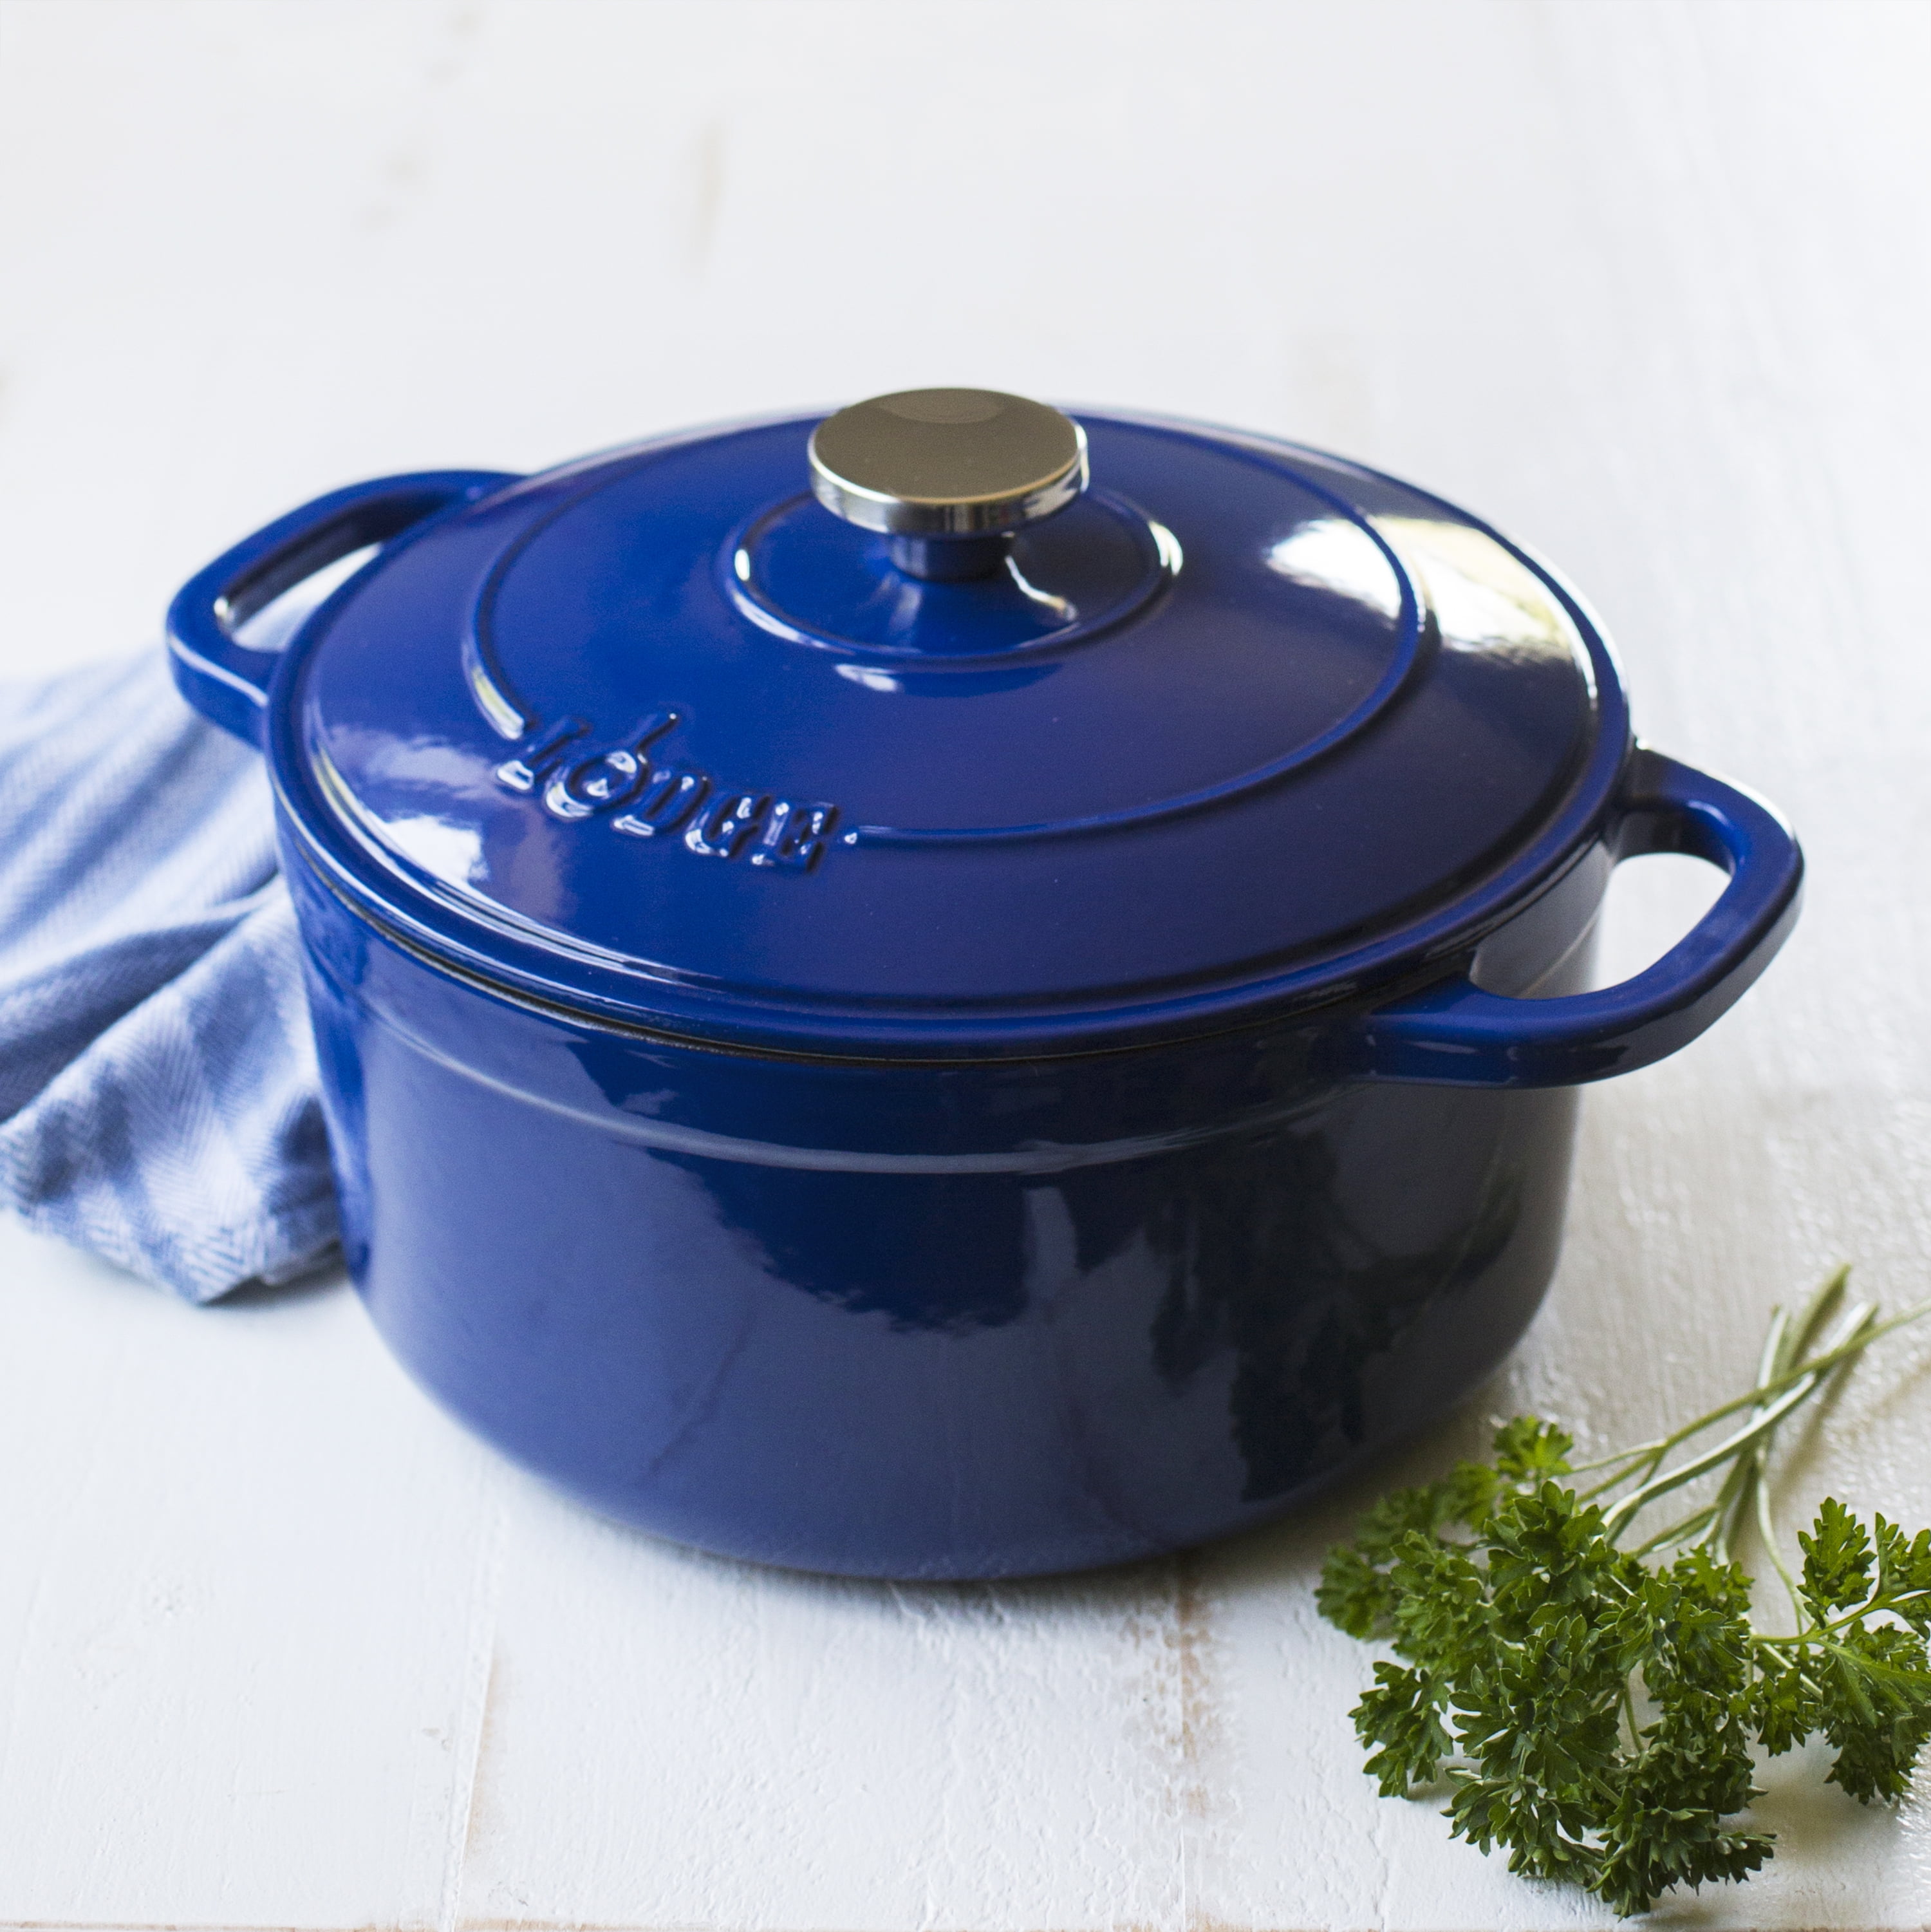 Lodge Cast Iron Cast Iron Enameled Dutch Oven, EC6D50 at Tractor